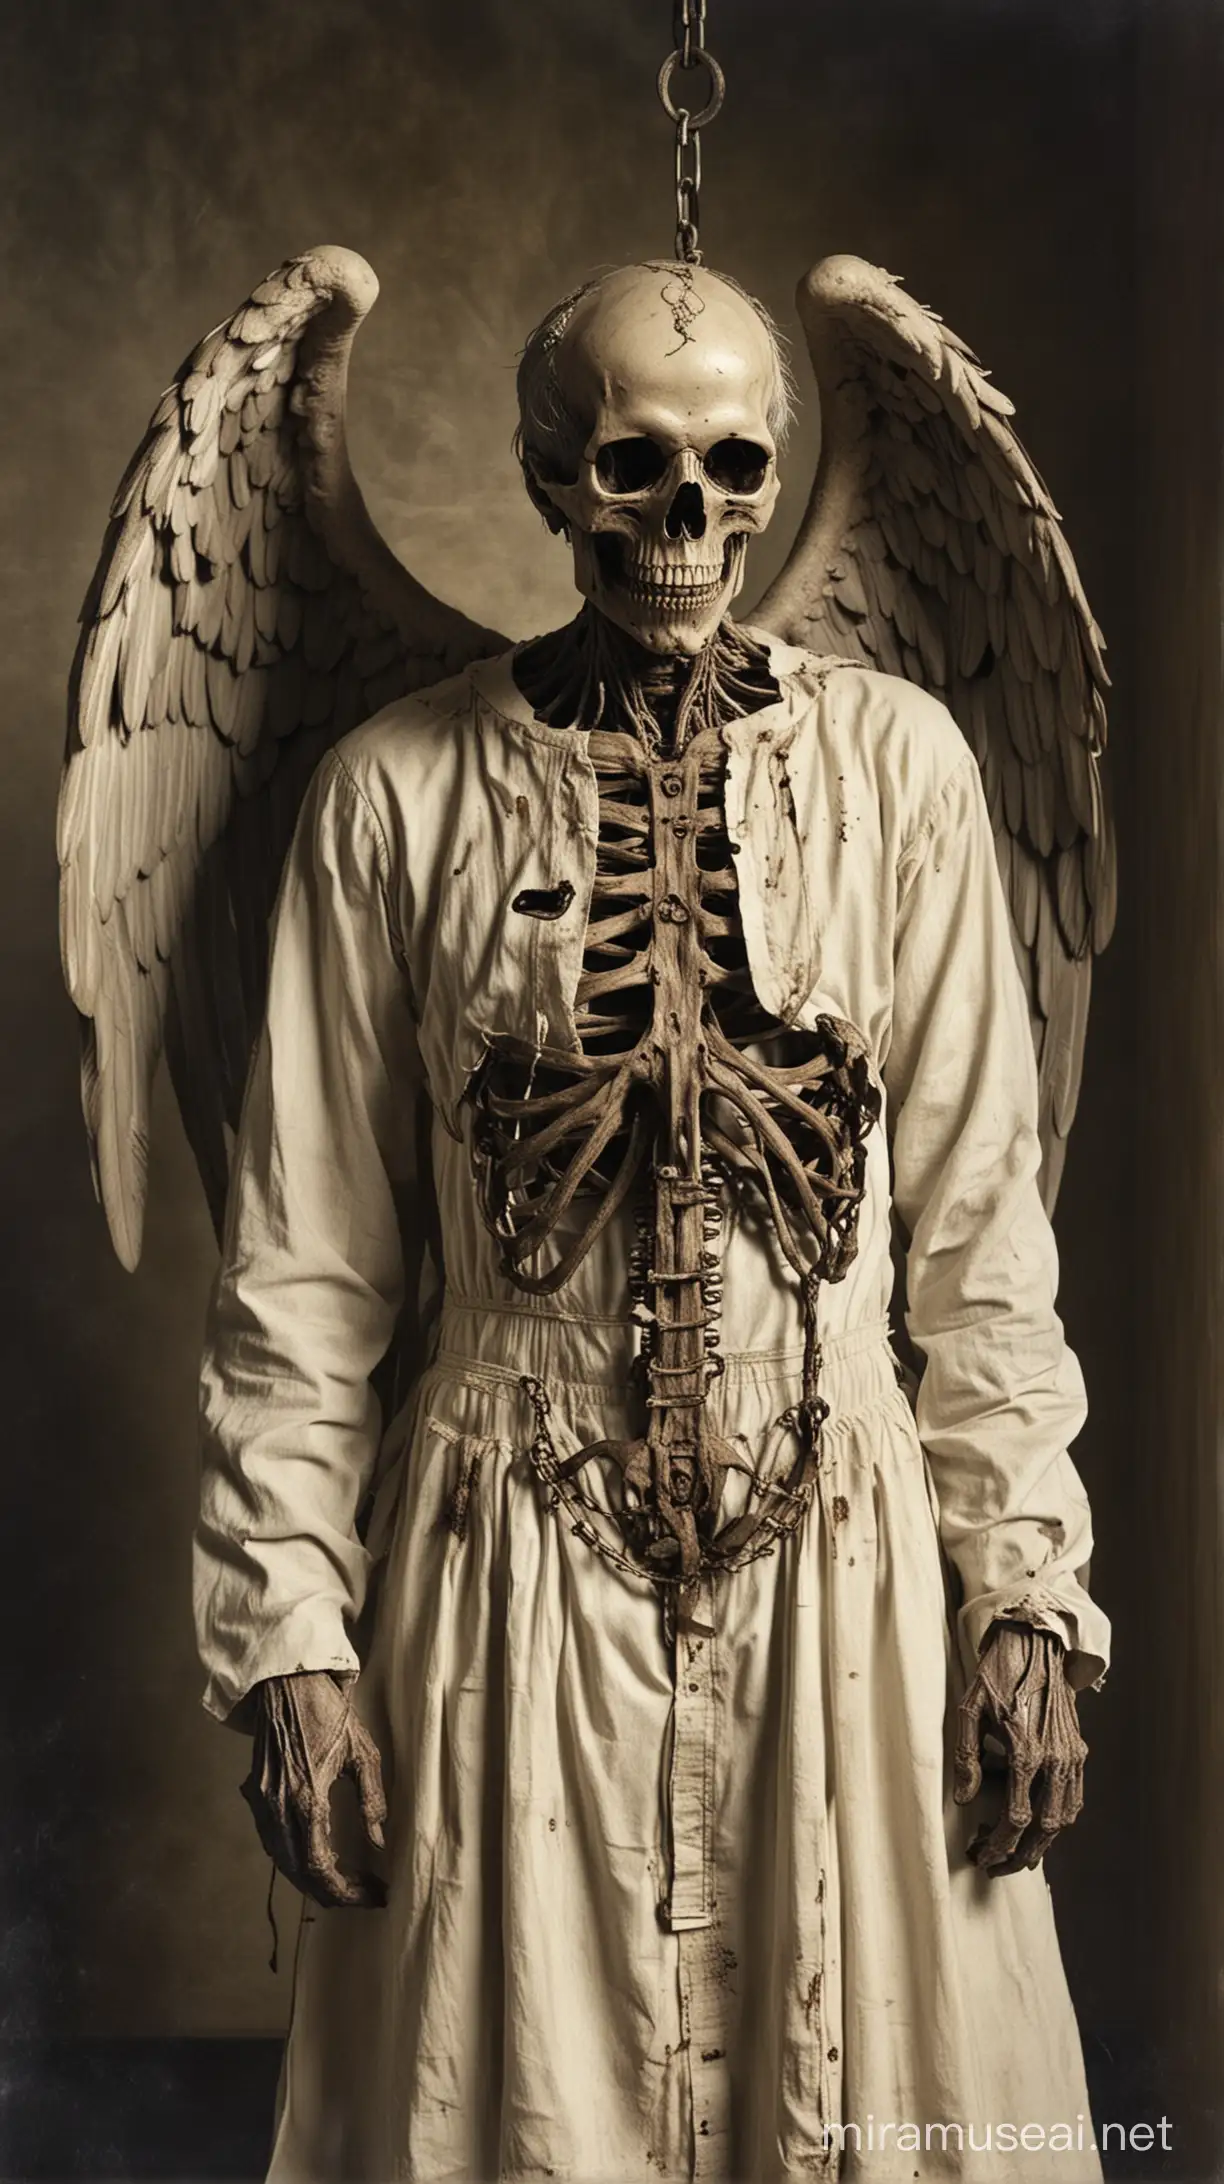 his experiments and tortures were so cruel that he earned the nickname "The Angel of Death''